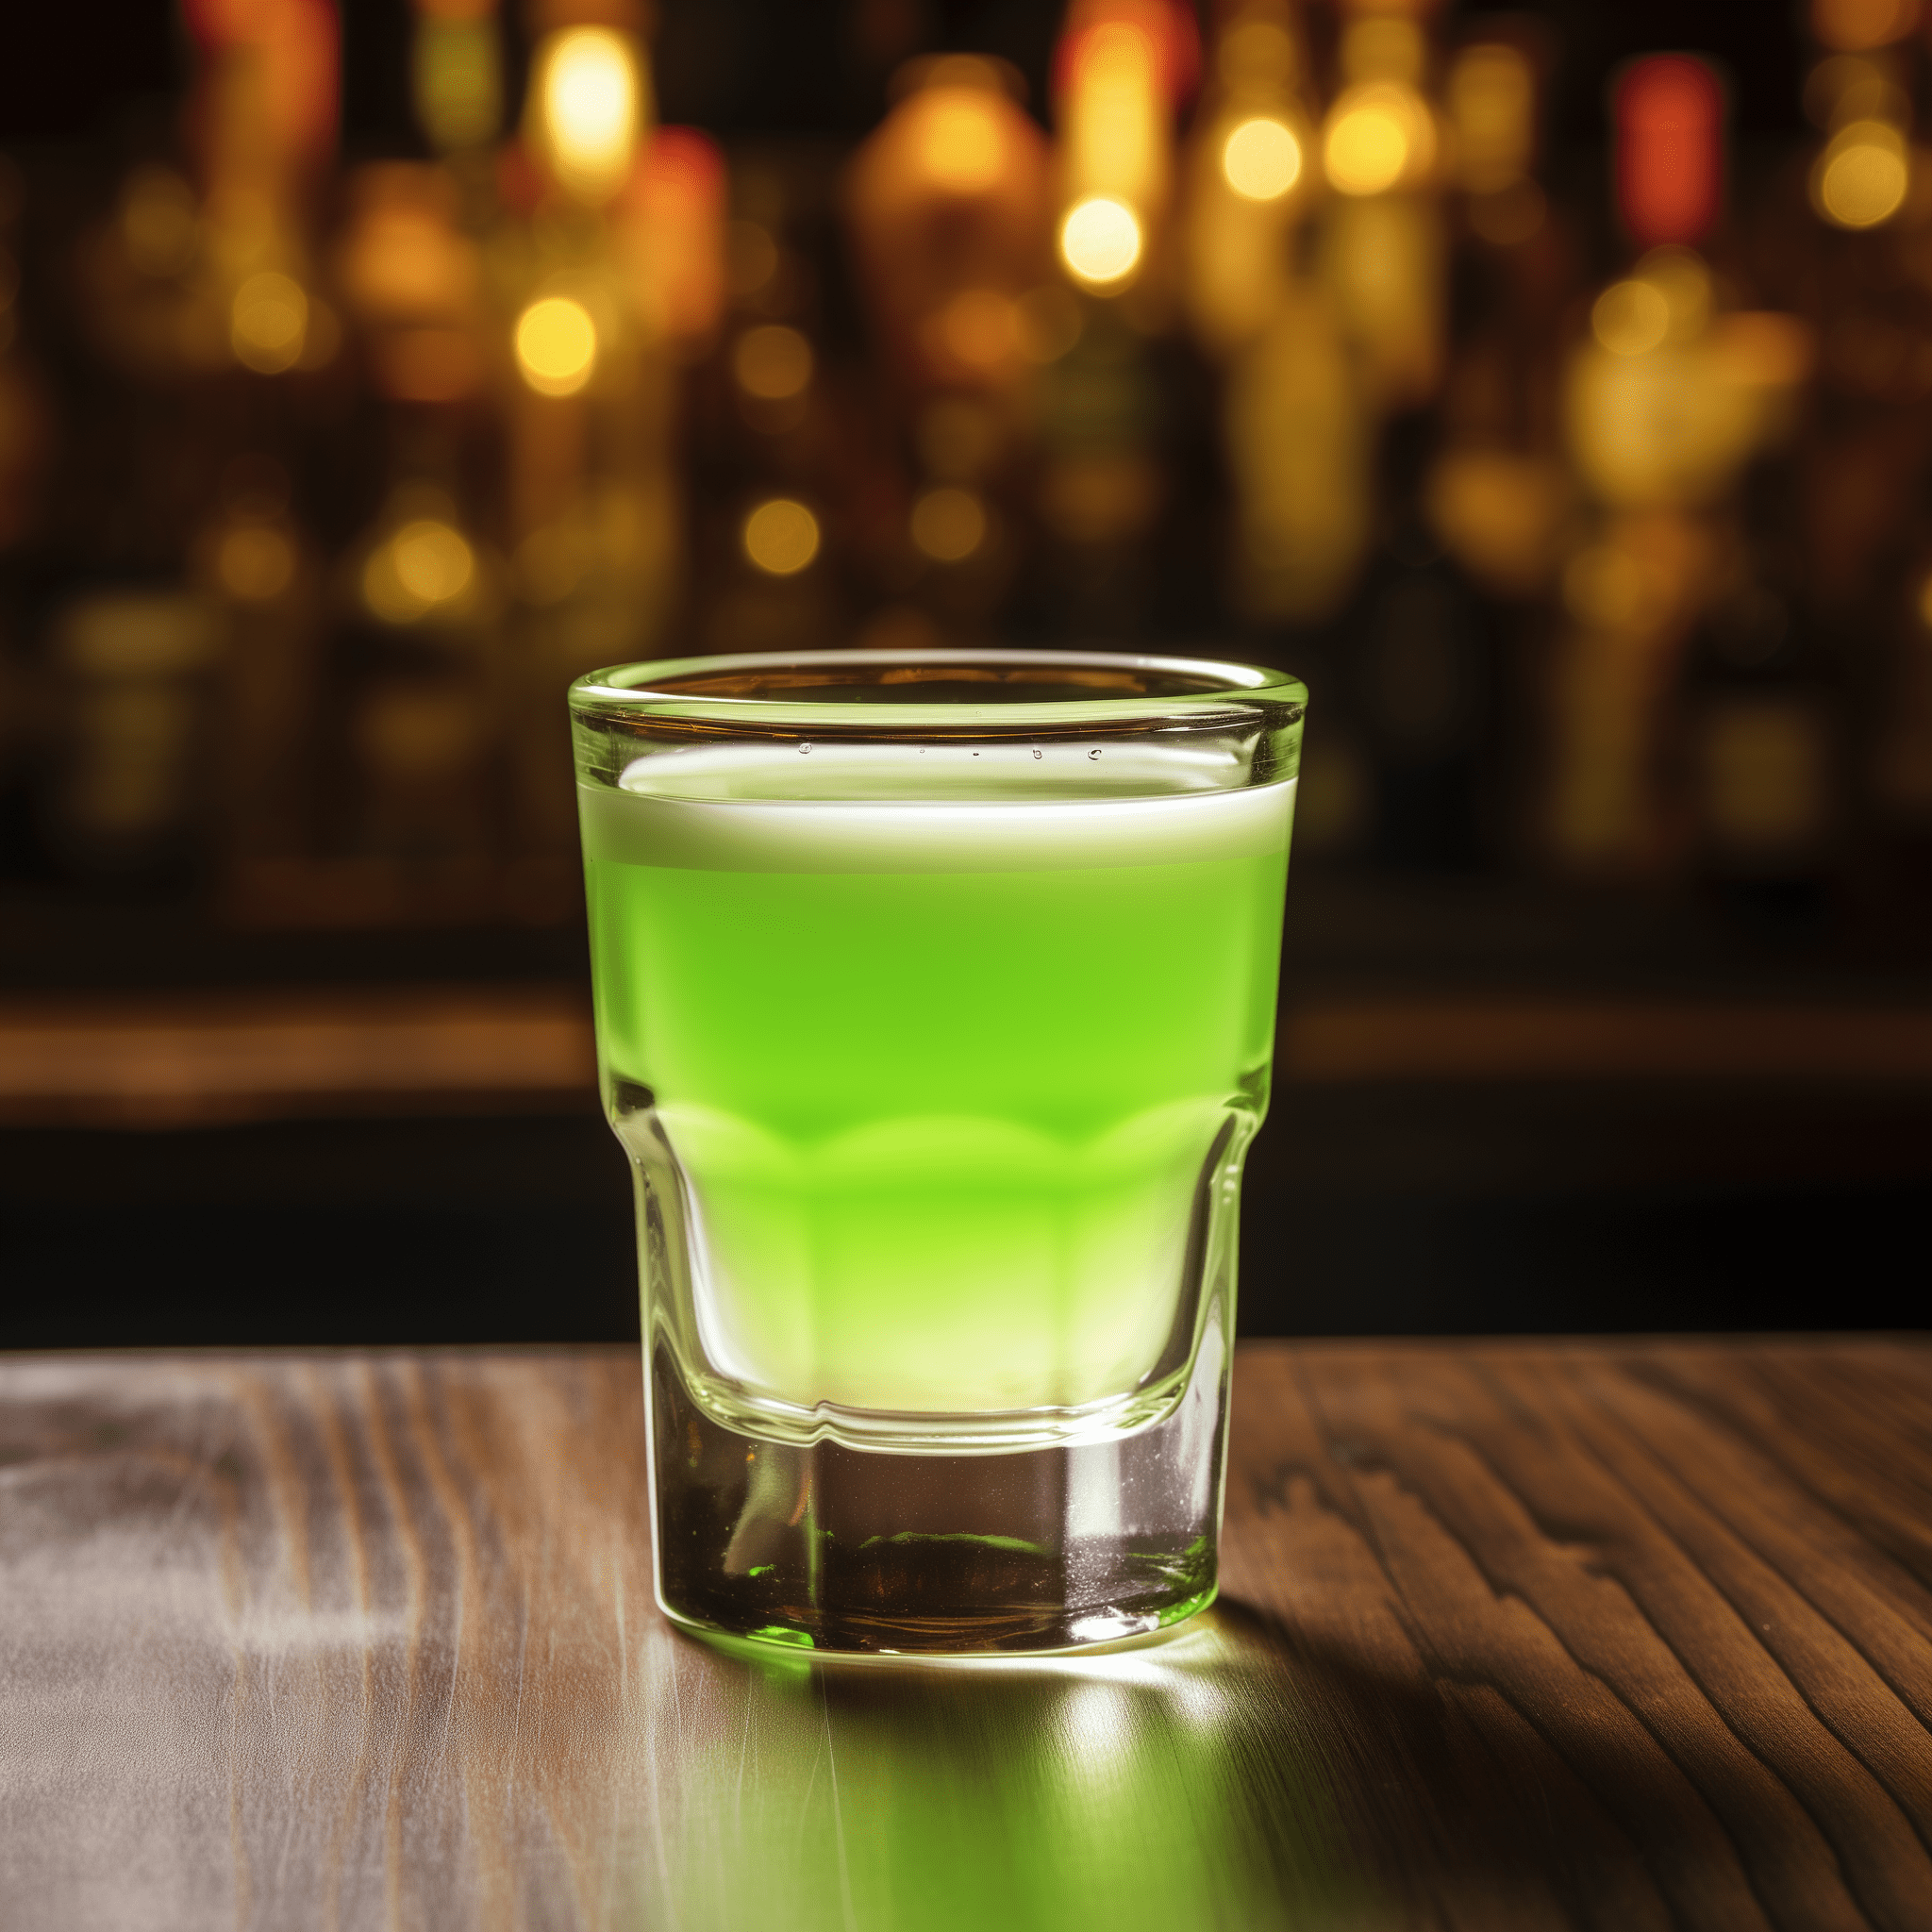 Squashed Frog Recipe - The Squashed Frog shot offers a sweet and creamy flavor with a hint of fruitiness from the Midori. The advocaat provides a rich, eggy layer, while the raspberry cordial adds a touch of tartness. The Baileys gives it a smooth finish.